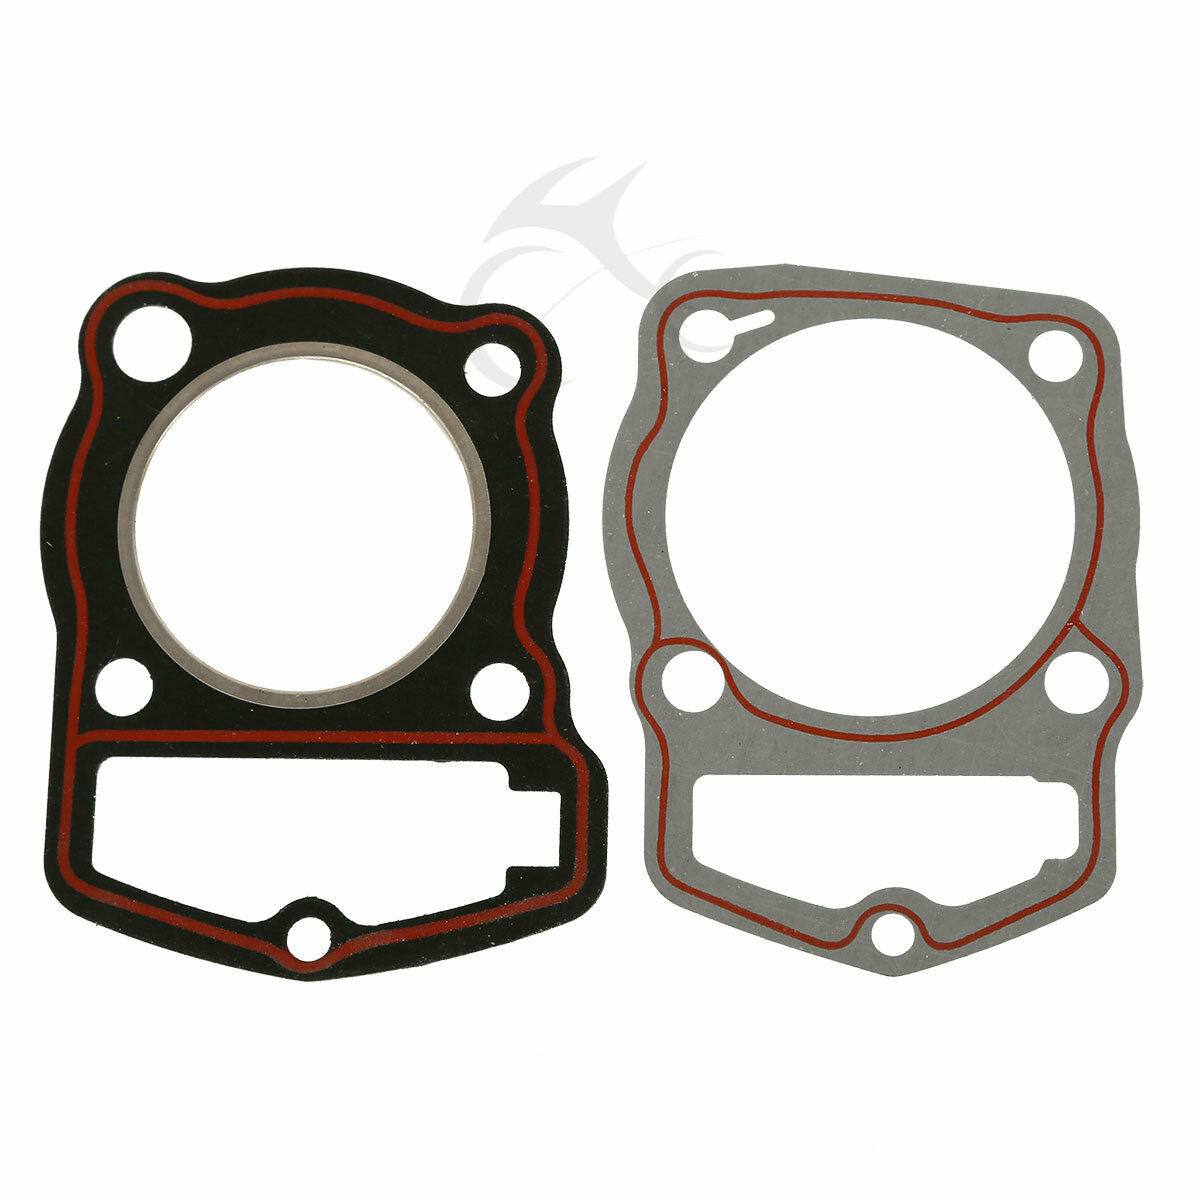 Cylinder Piston Rings Gasket Rebuild Kit For Honda CB125S CL125S XL125 SL125 US - Moto Life Products